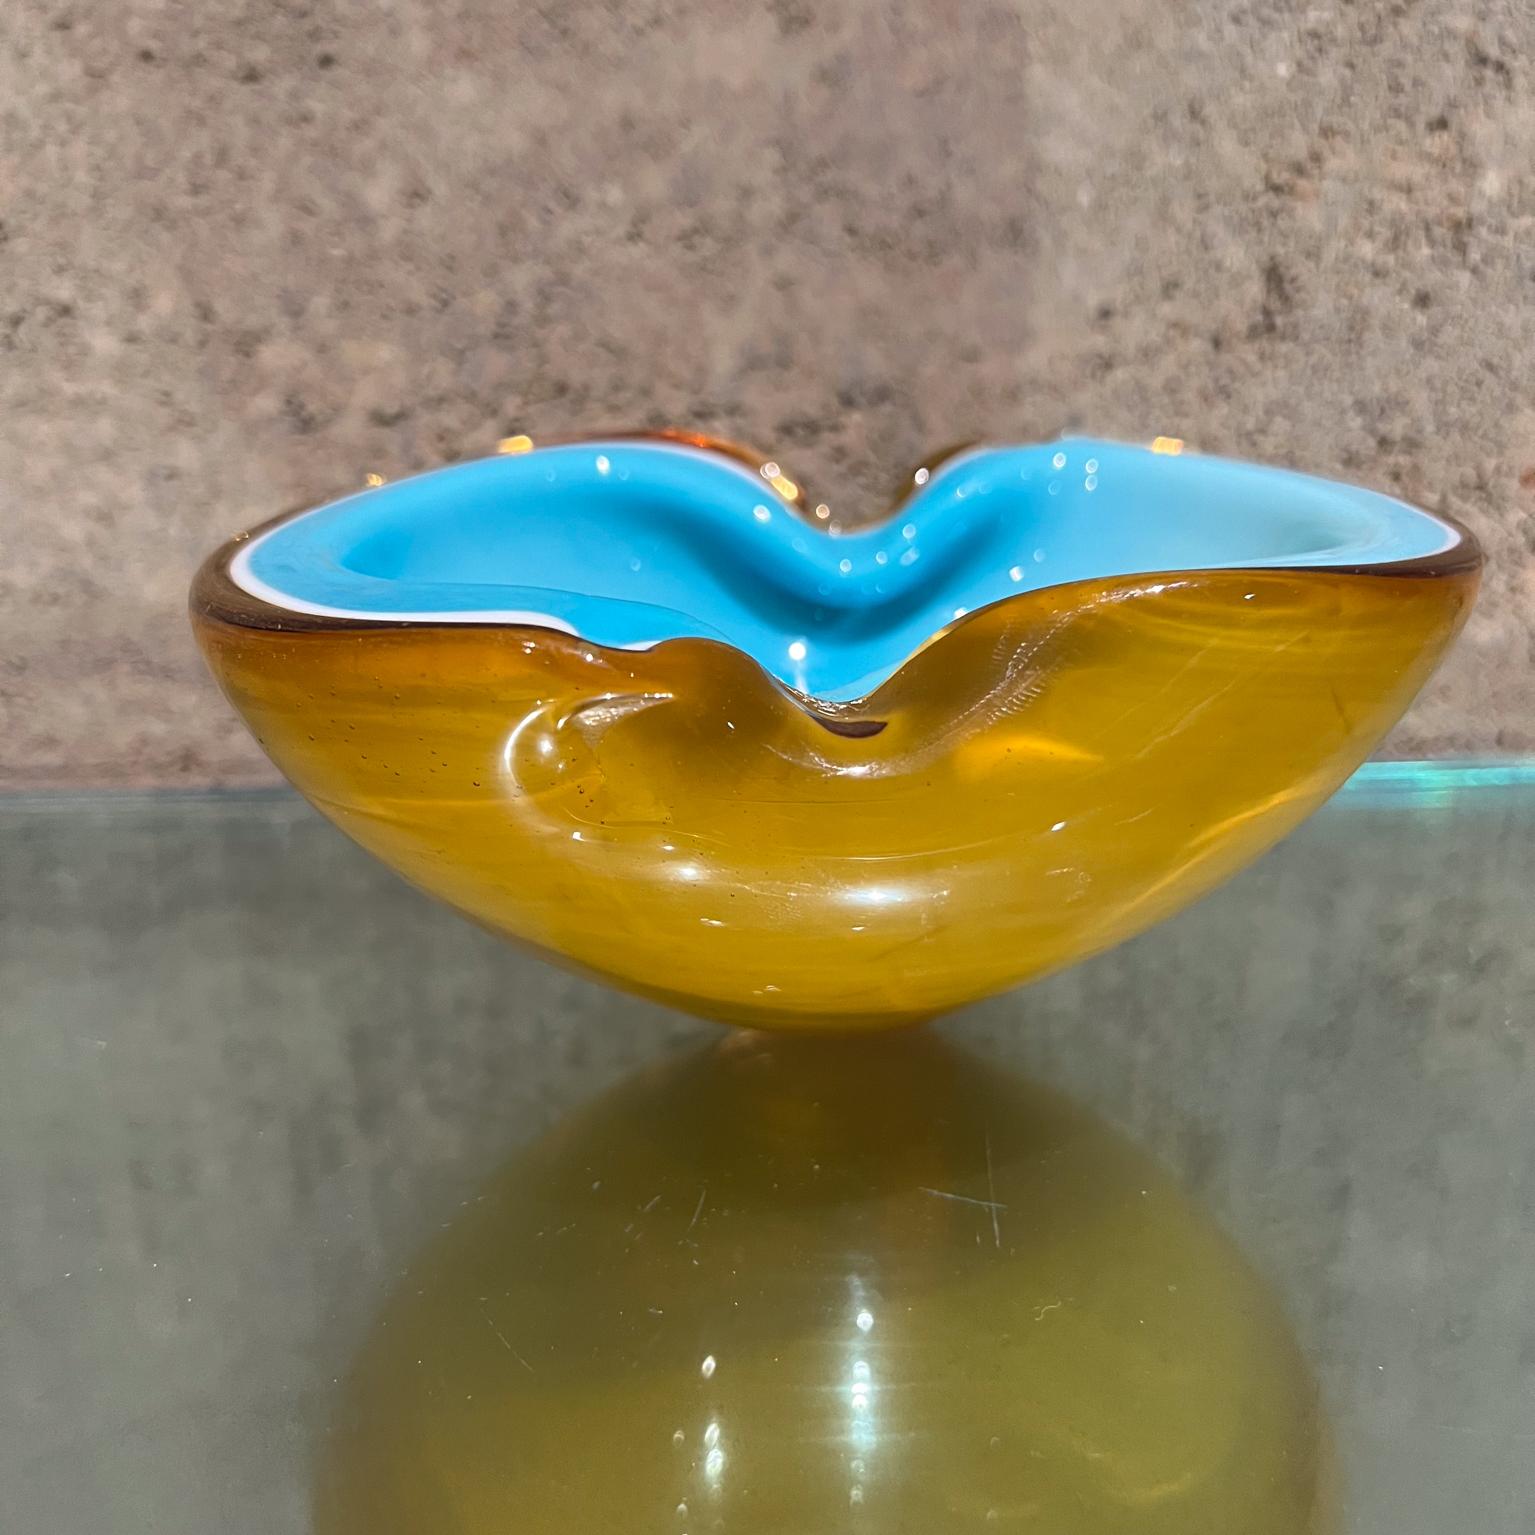 1970s Murano Art Glass Turquoise Amber Geode Bowl 
Luscious color sensual organic shape
2.75 h x 5 d x 6.13
Original preowned vintage condition
Refer to images present.